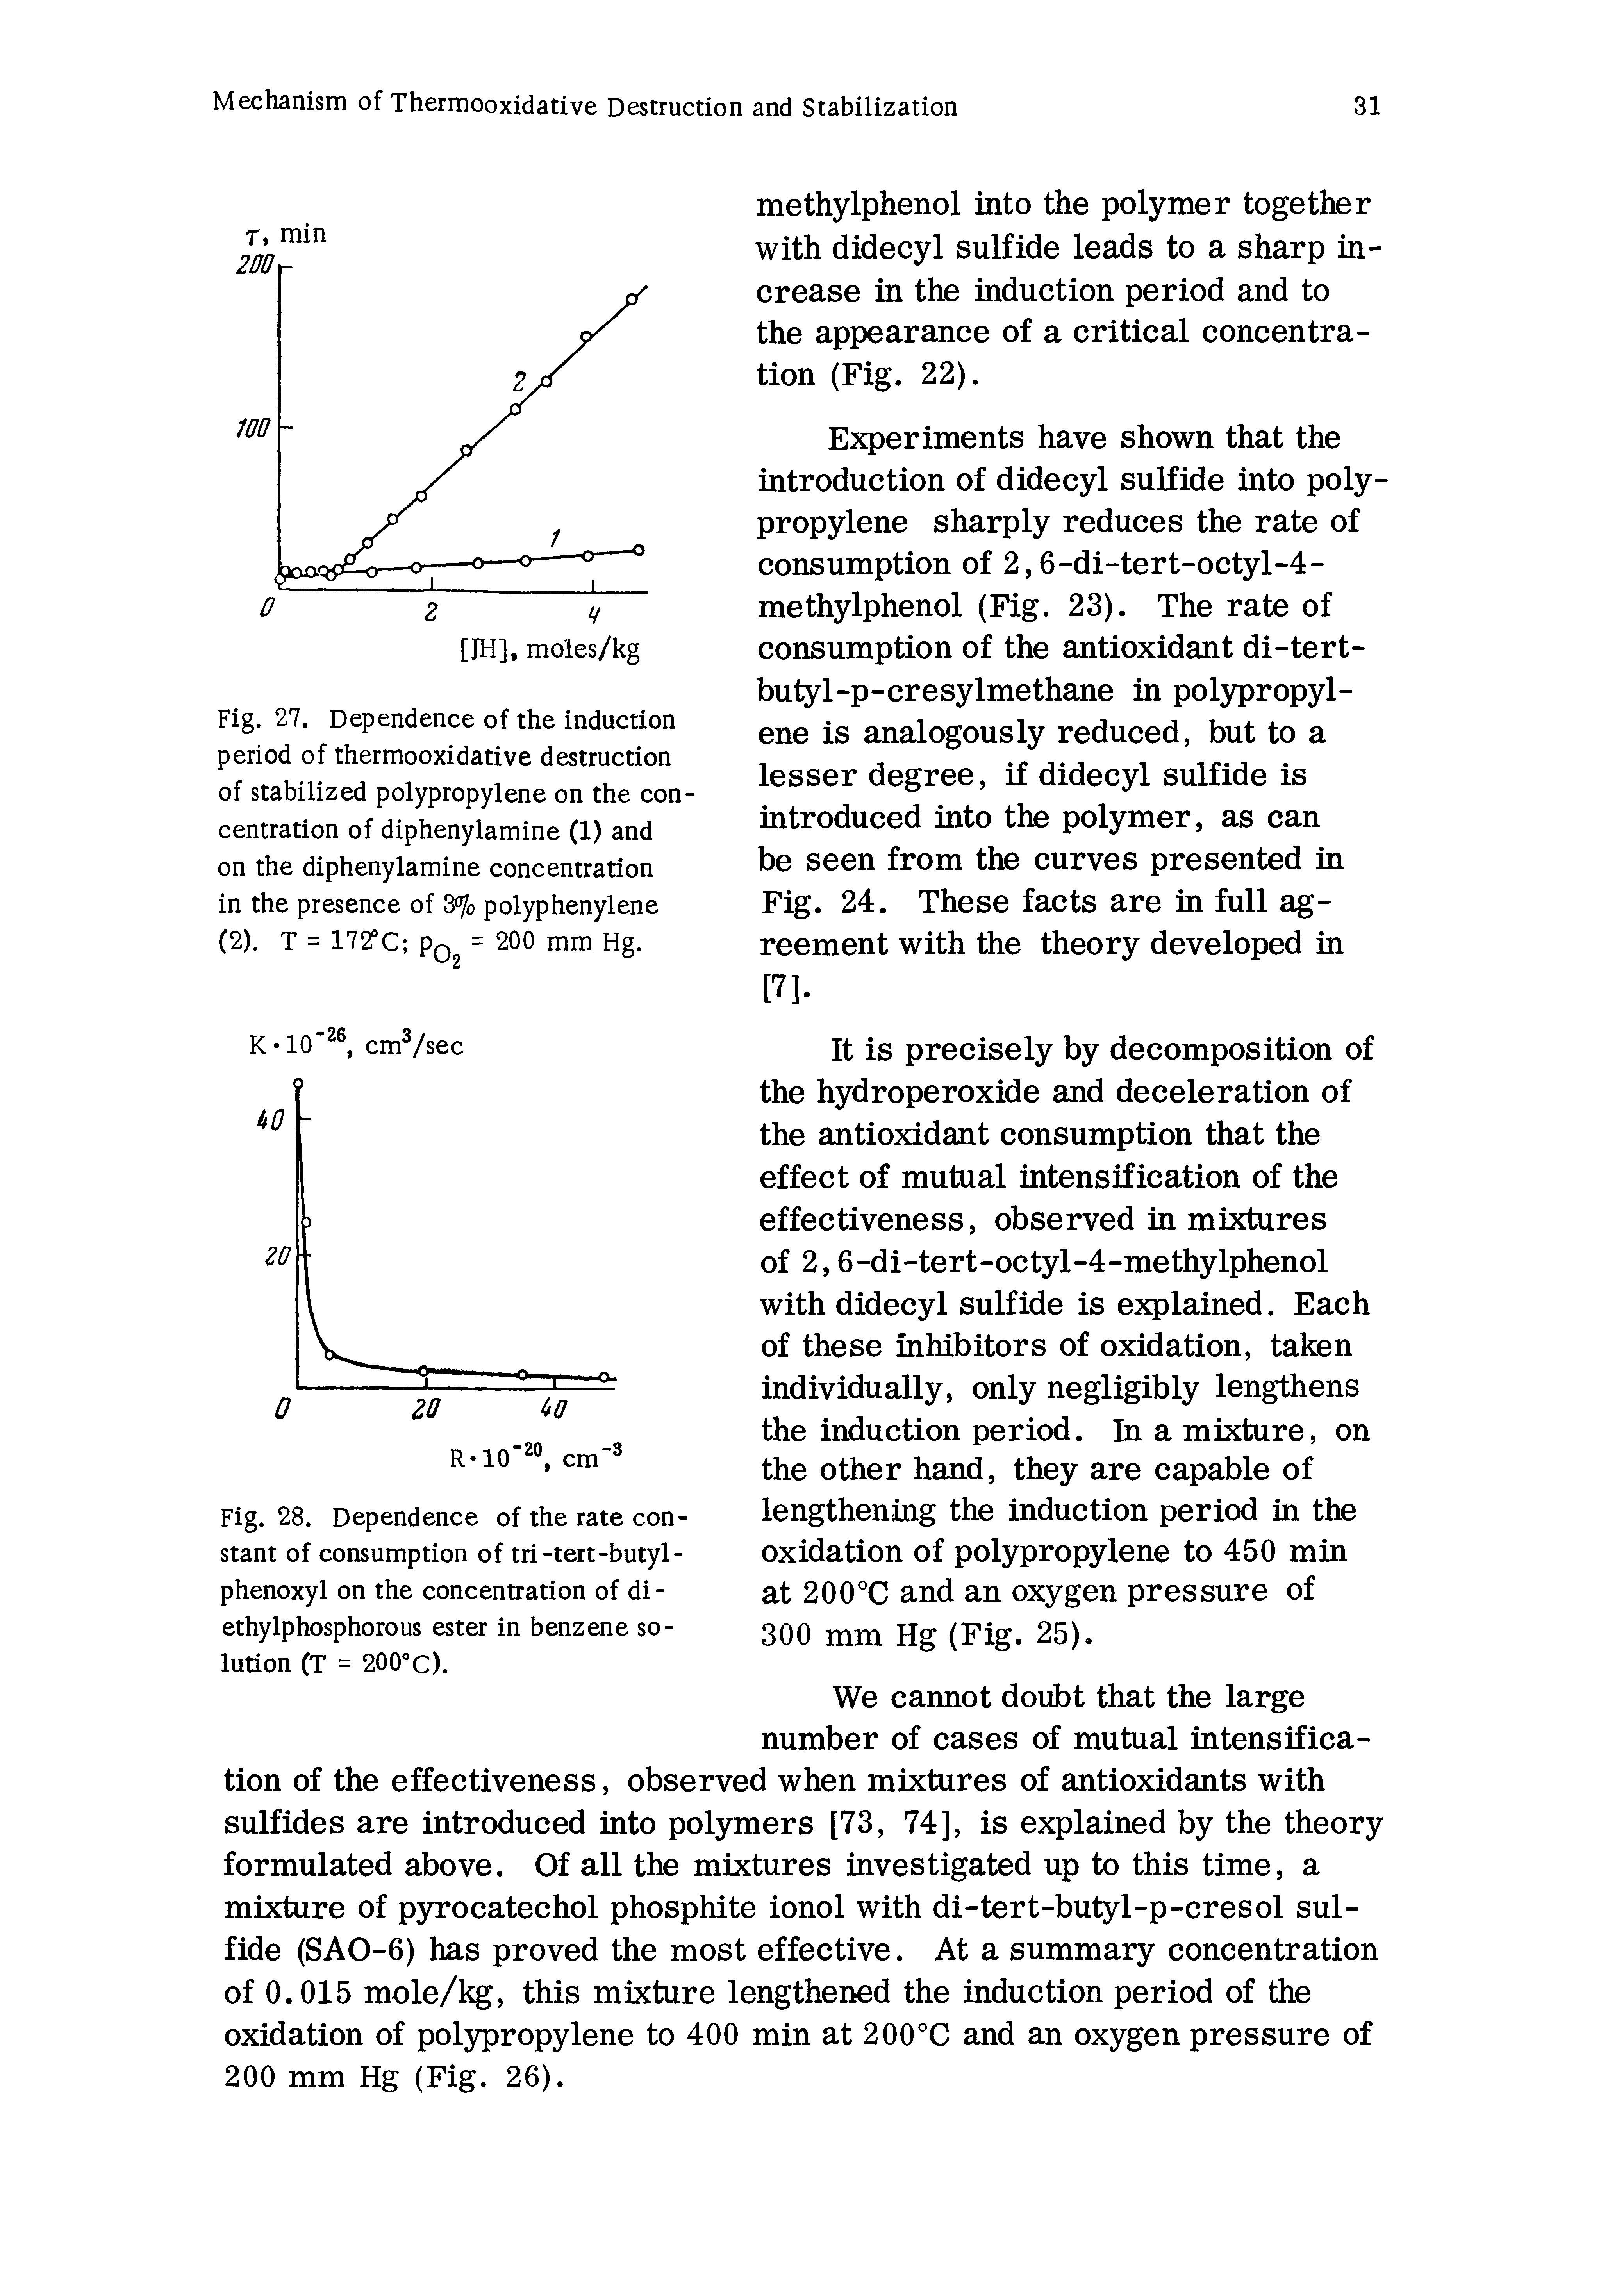 Fig. 28. Dependence of the rate constant of consumption of tri-tert-butyl-phenoxyl on the concentration of di -ethylphosphorous ester in benzene solution (T = 200°C).